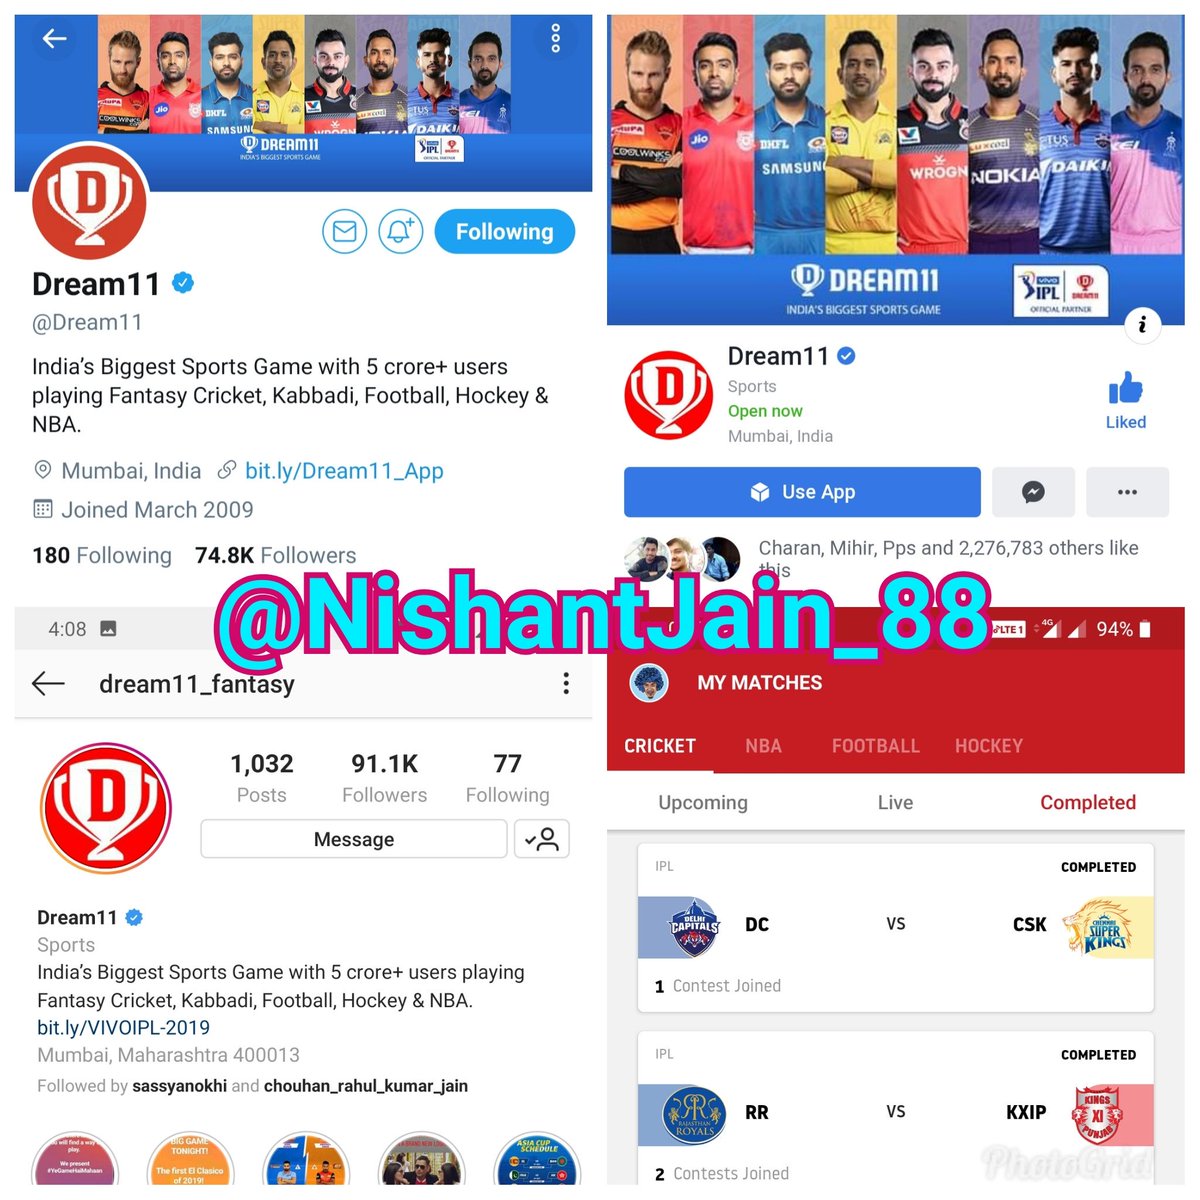 @Dream11 @IPL Wish to be a part of this Amazing Once in a Lifetime Experience from @Dream11 

Have been following you on social platforms and participating in all your contests.

Here is my yesterday's team for #RCBvsKXIP 

#Mumbai

#Dream11GameChanger 
#Dream11 #YeGameHaiMahaan #VIVOIPL2019